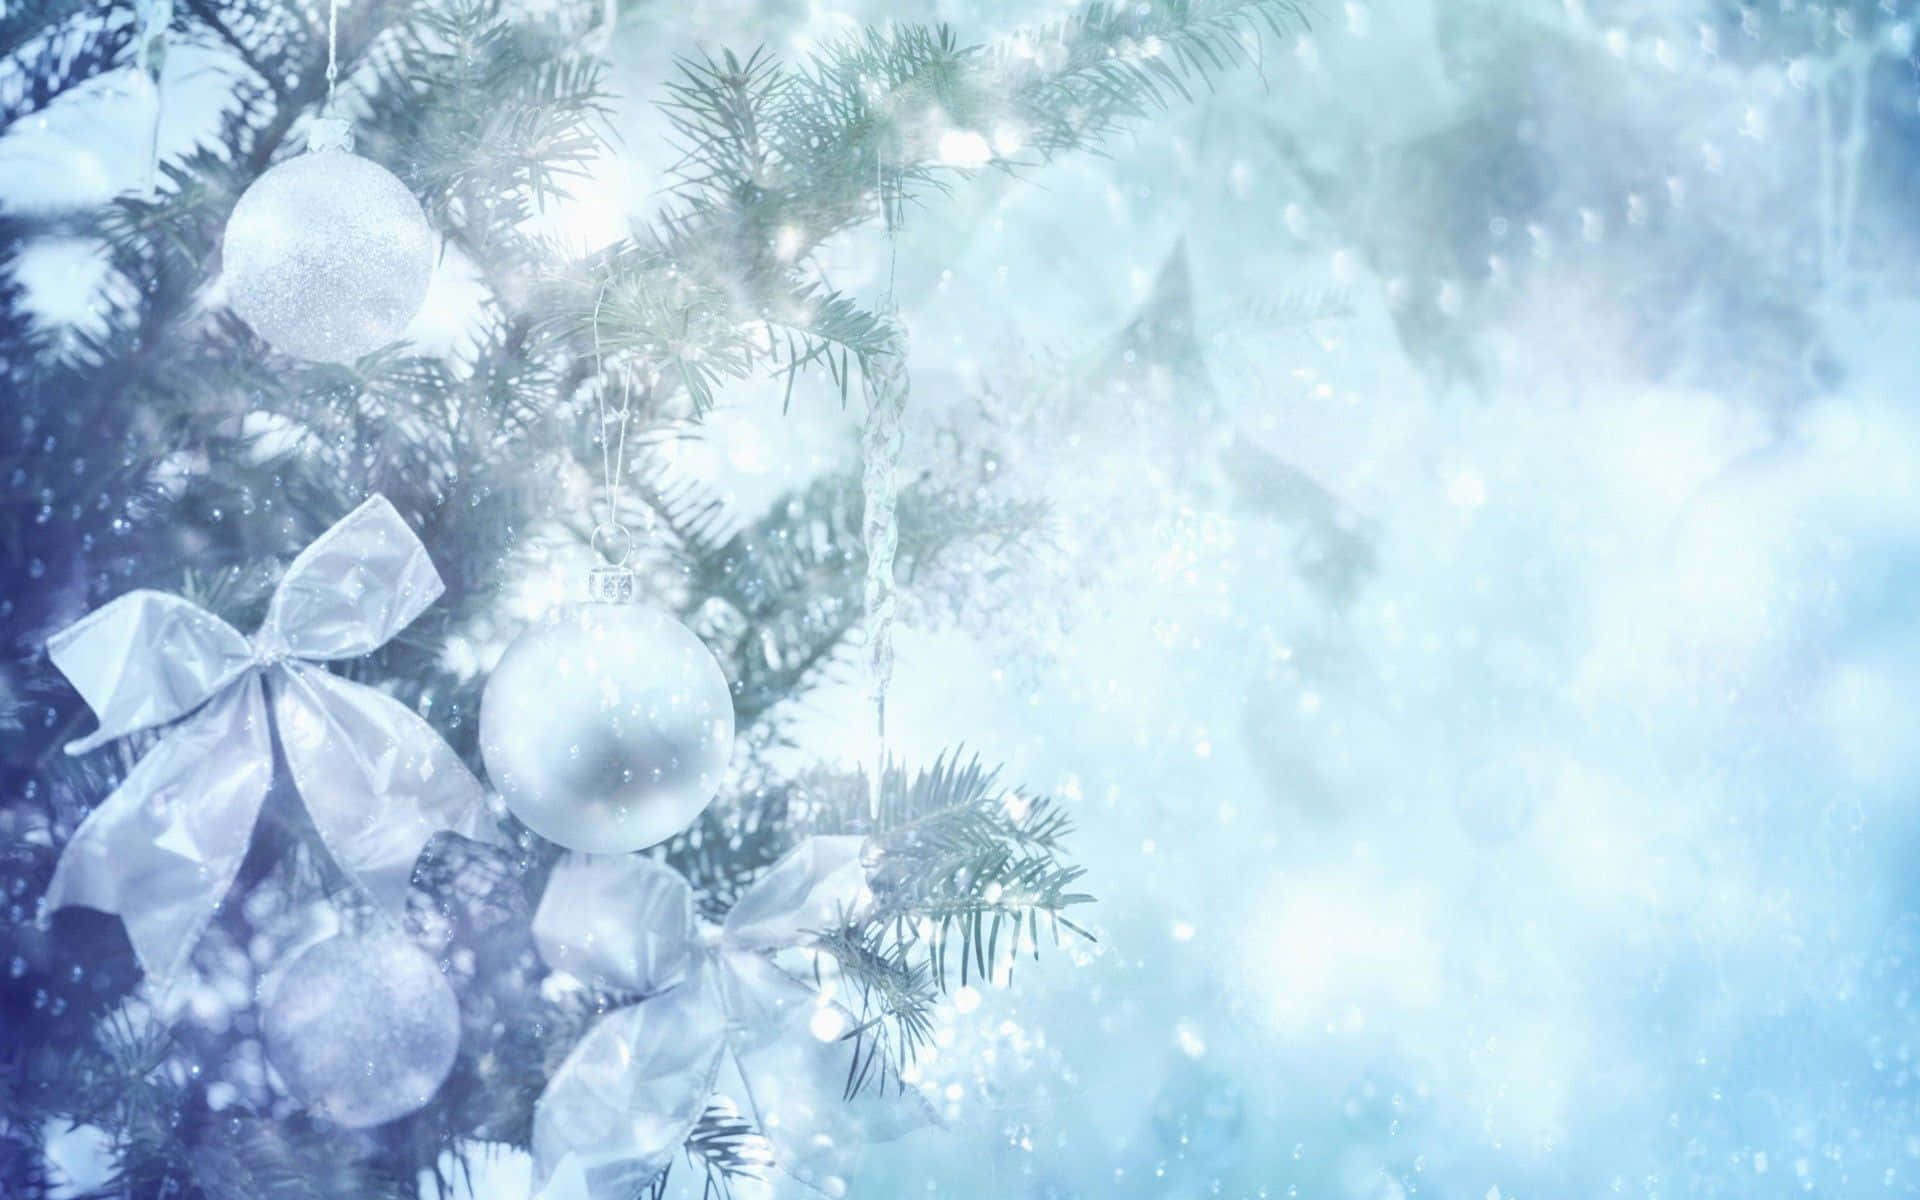 A Winter Wonderland: Snowy Landscape with Sparkling Christmas Trees Wallpaper